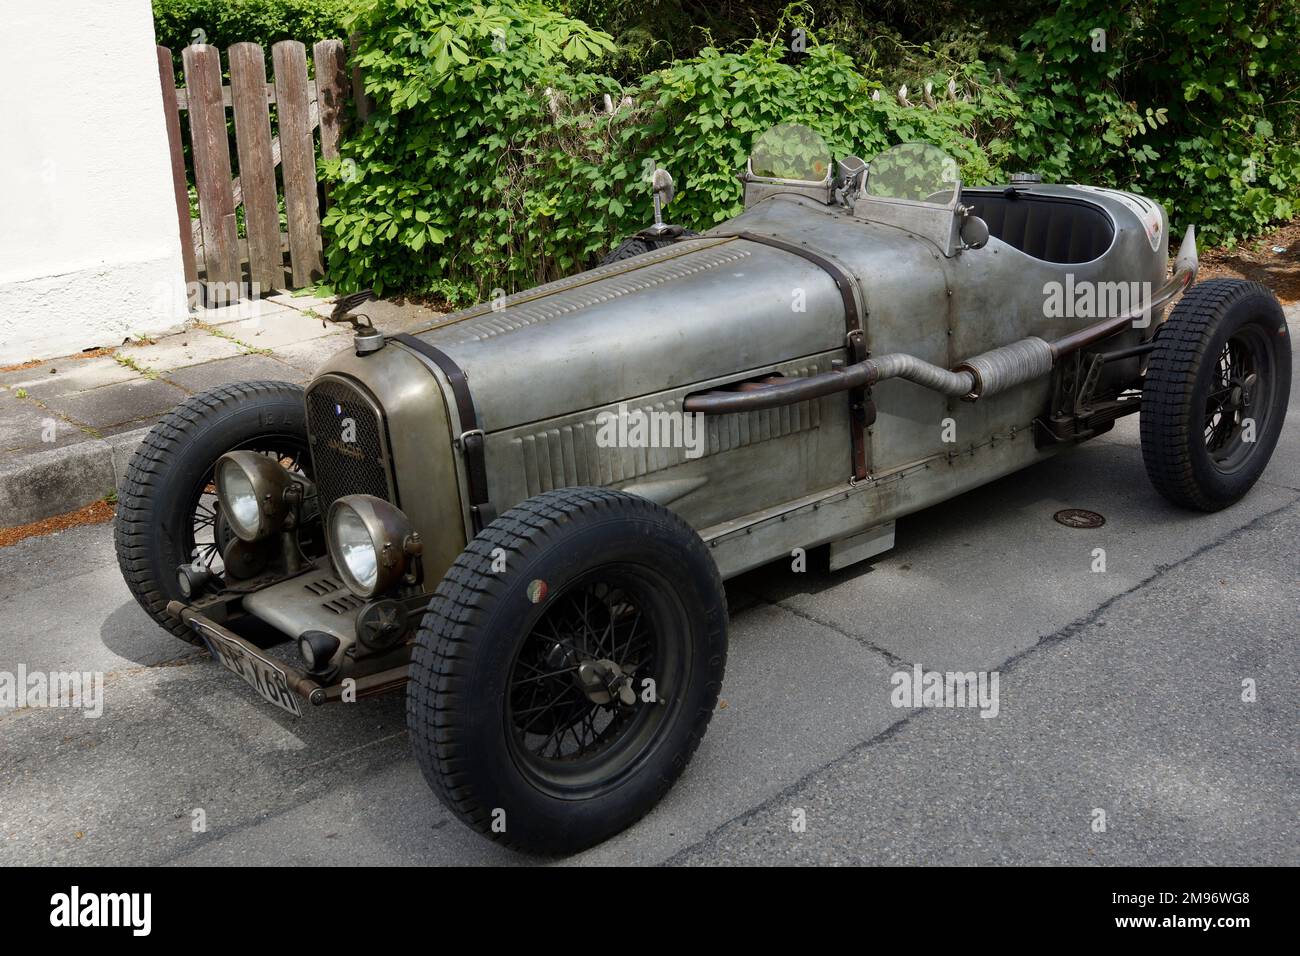 Germany, Bavaria, Herrsching, Stegen:  Vintage 'Amilcar' car - a French automobile manufactured from 1921 to 1940. Stock Photo